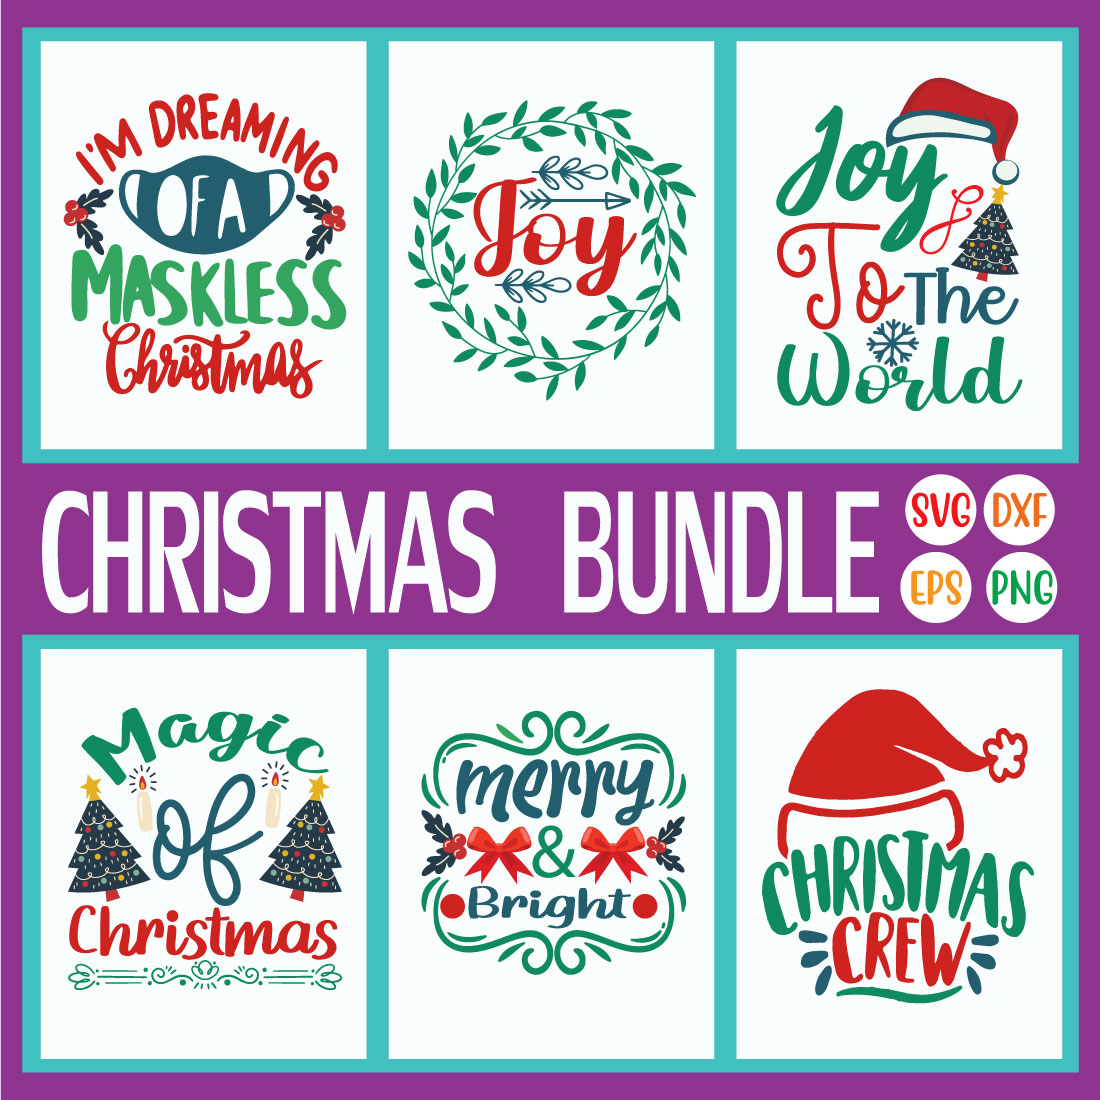 Christmas Design Quote Set Vol74 cover image.